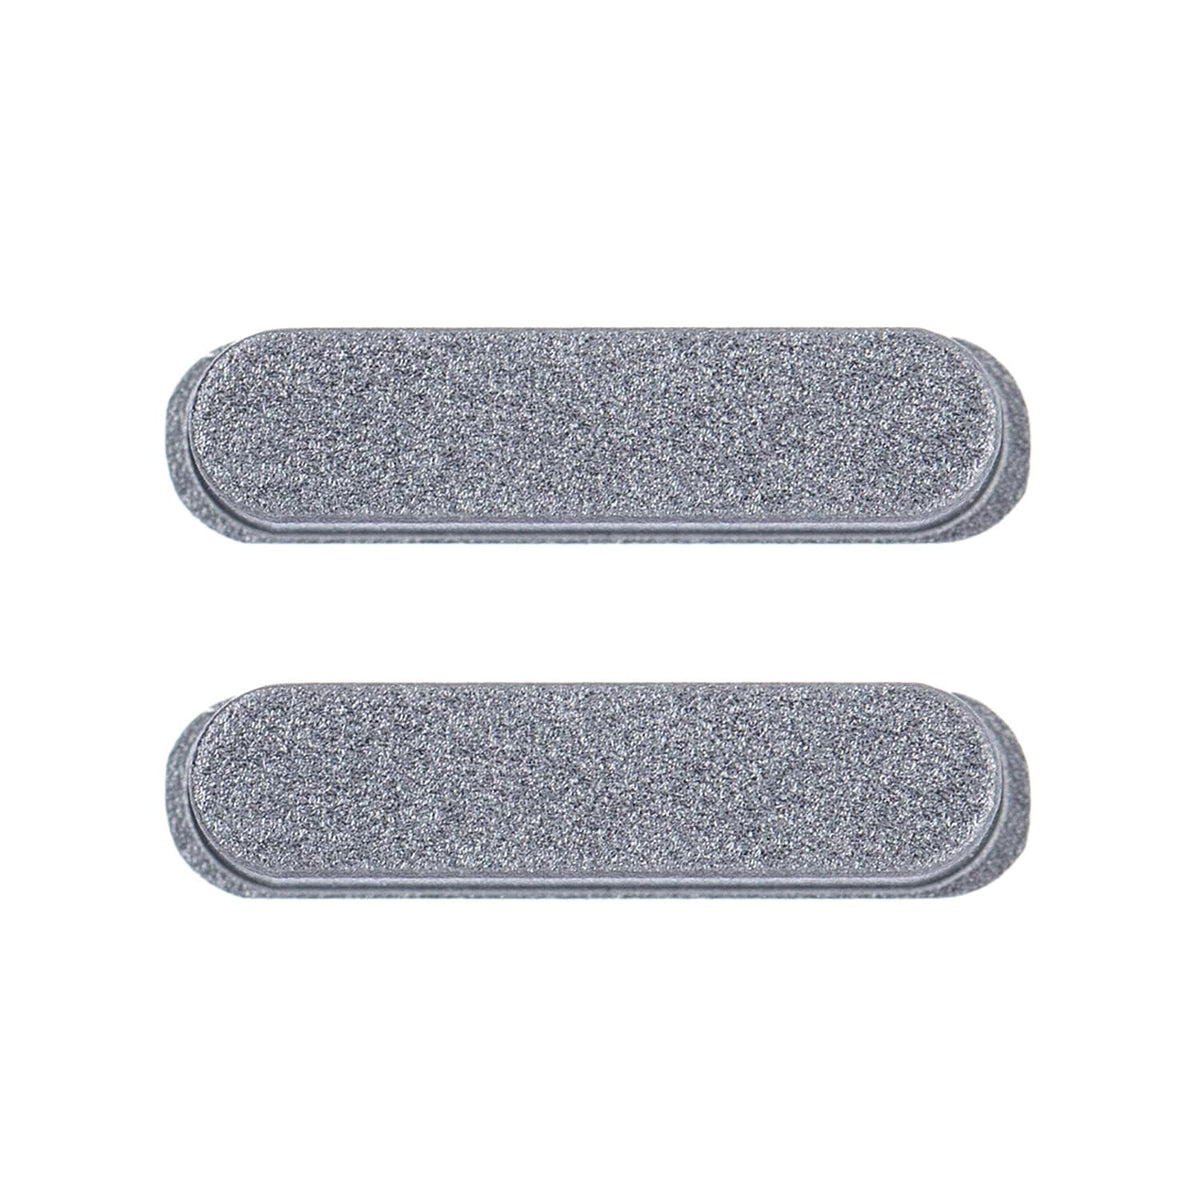 VOLUME BUTTON (2PCS/SET) FOR IPAD AIR 4/5  - SPACE GRAY